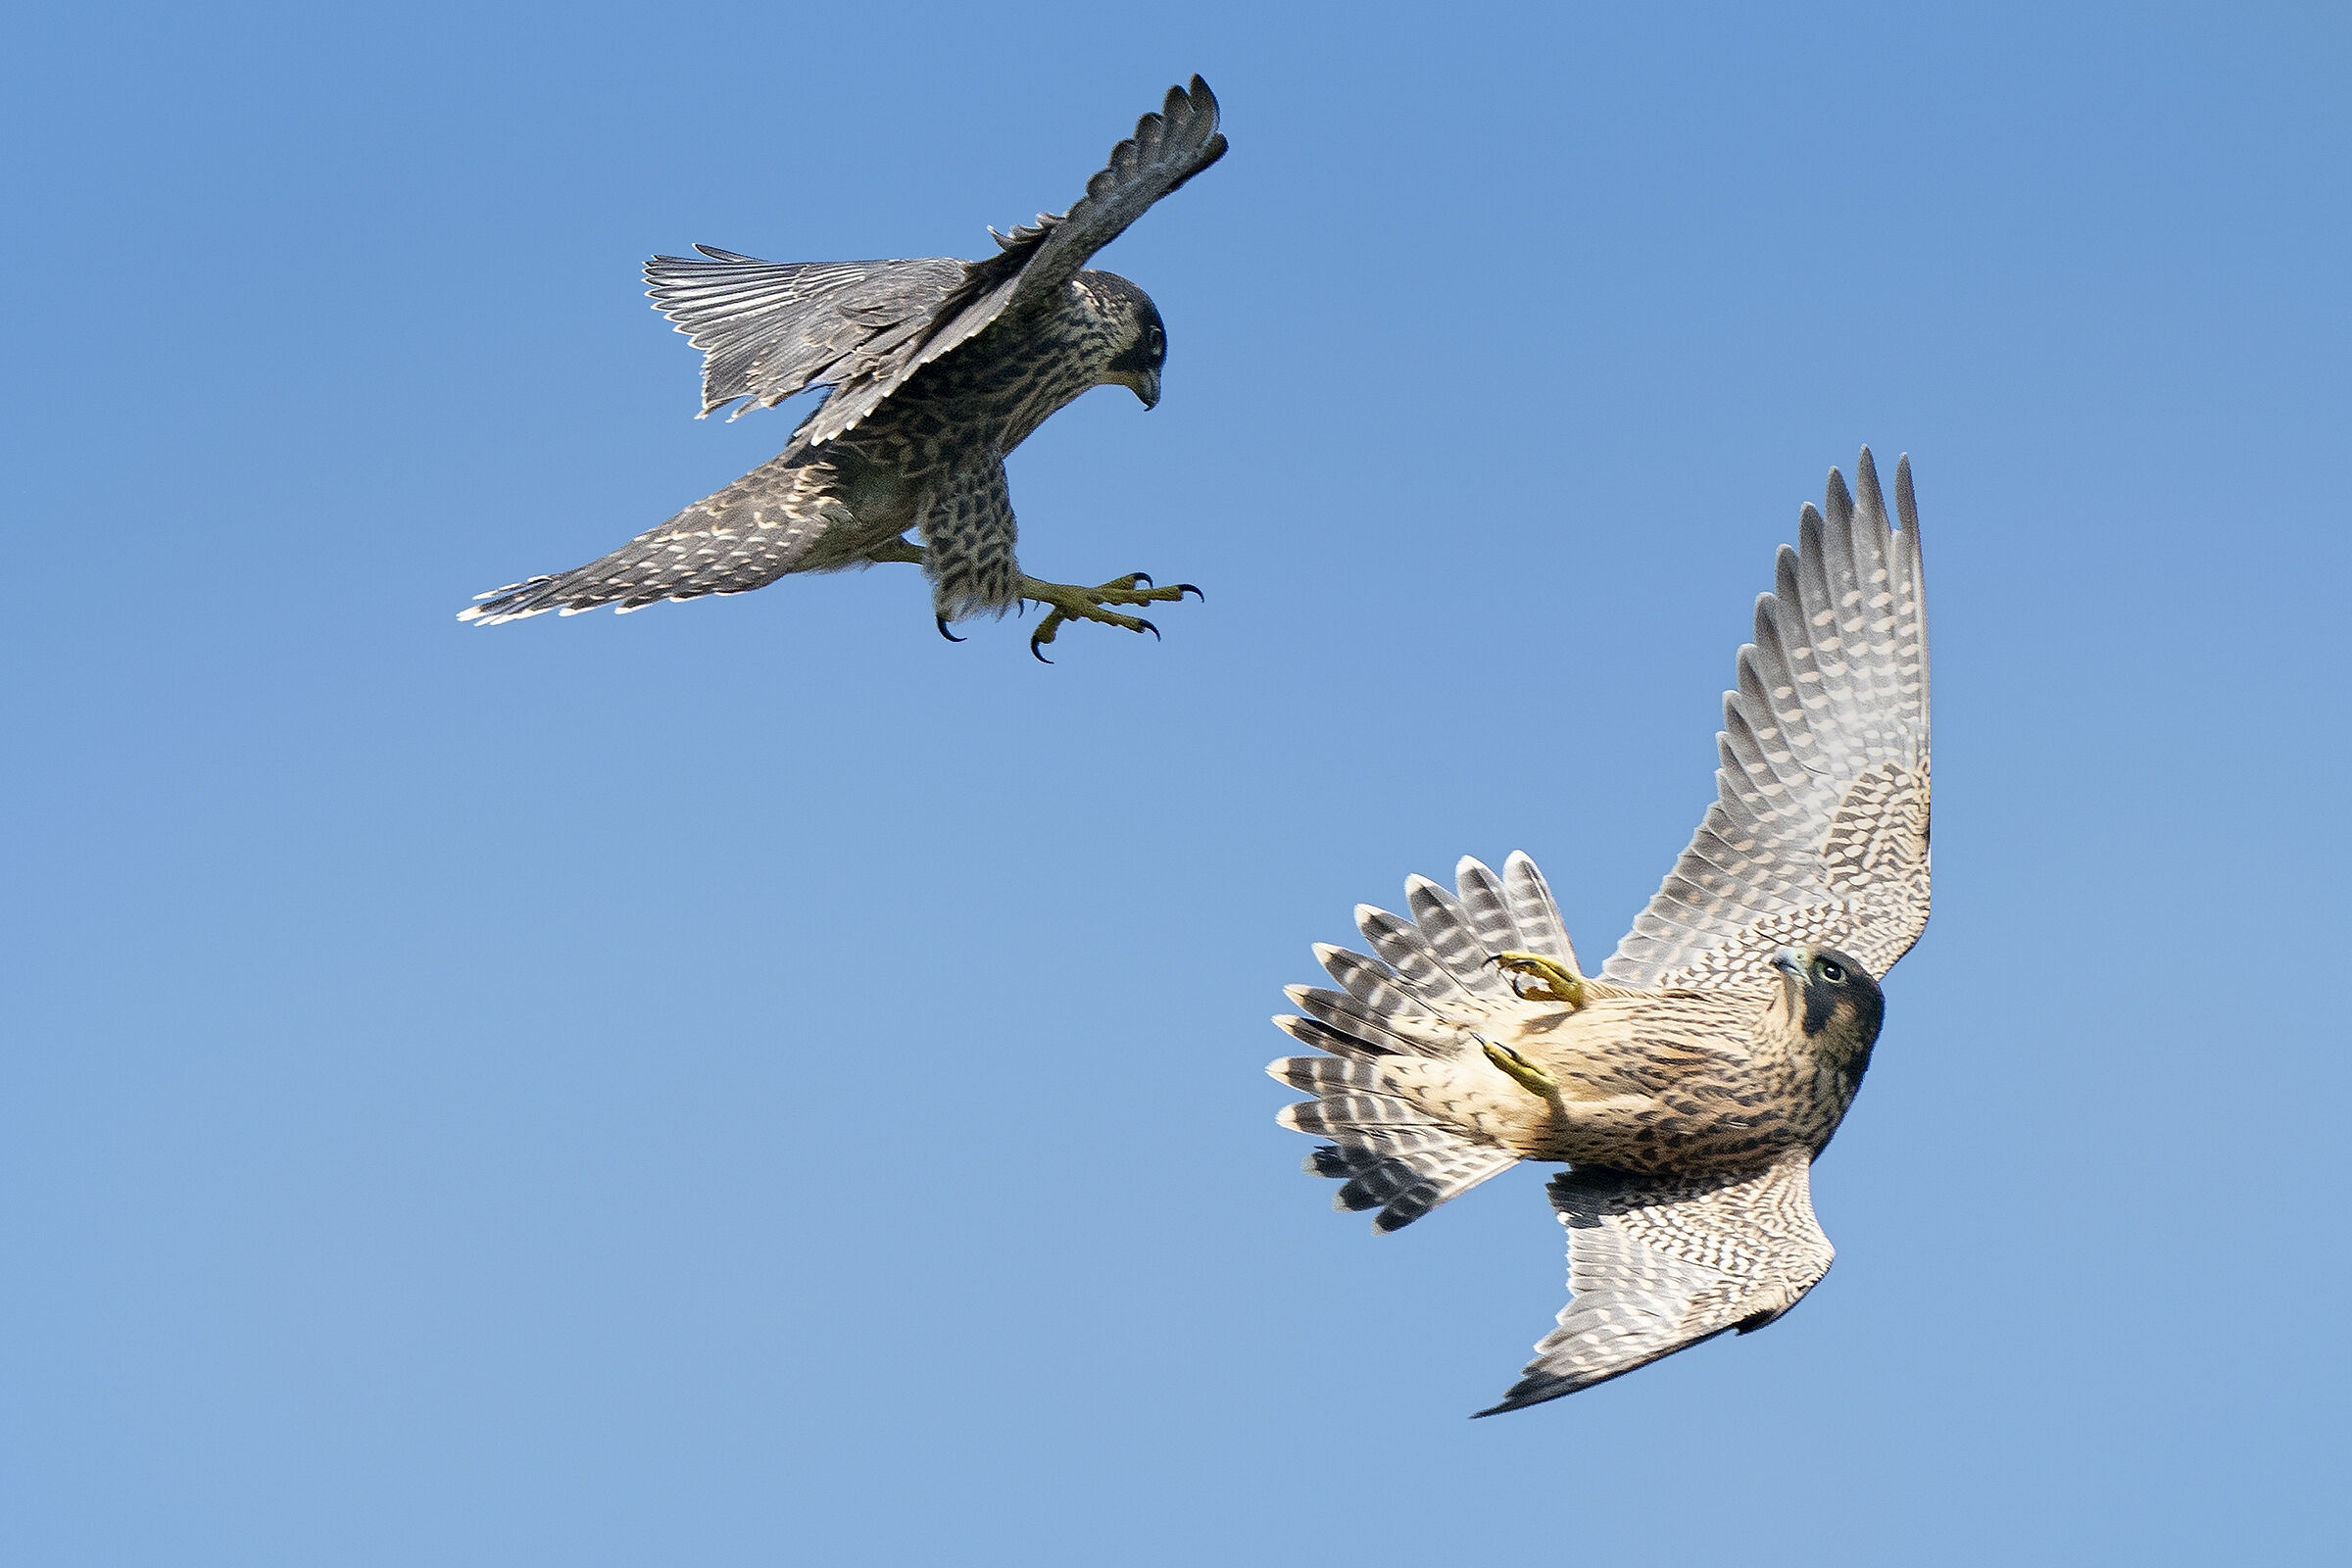 Acrobatic games of young peregrine falcons in flight....